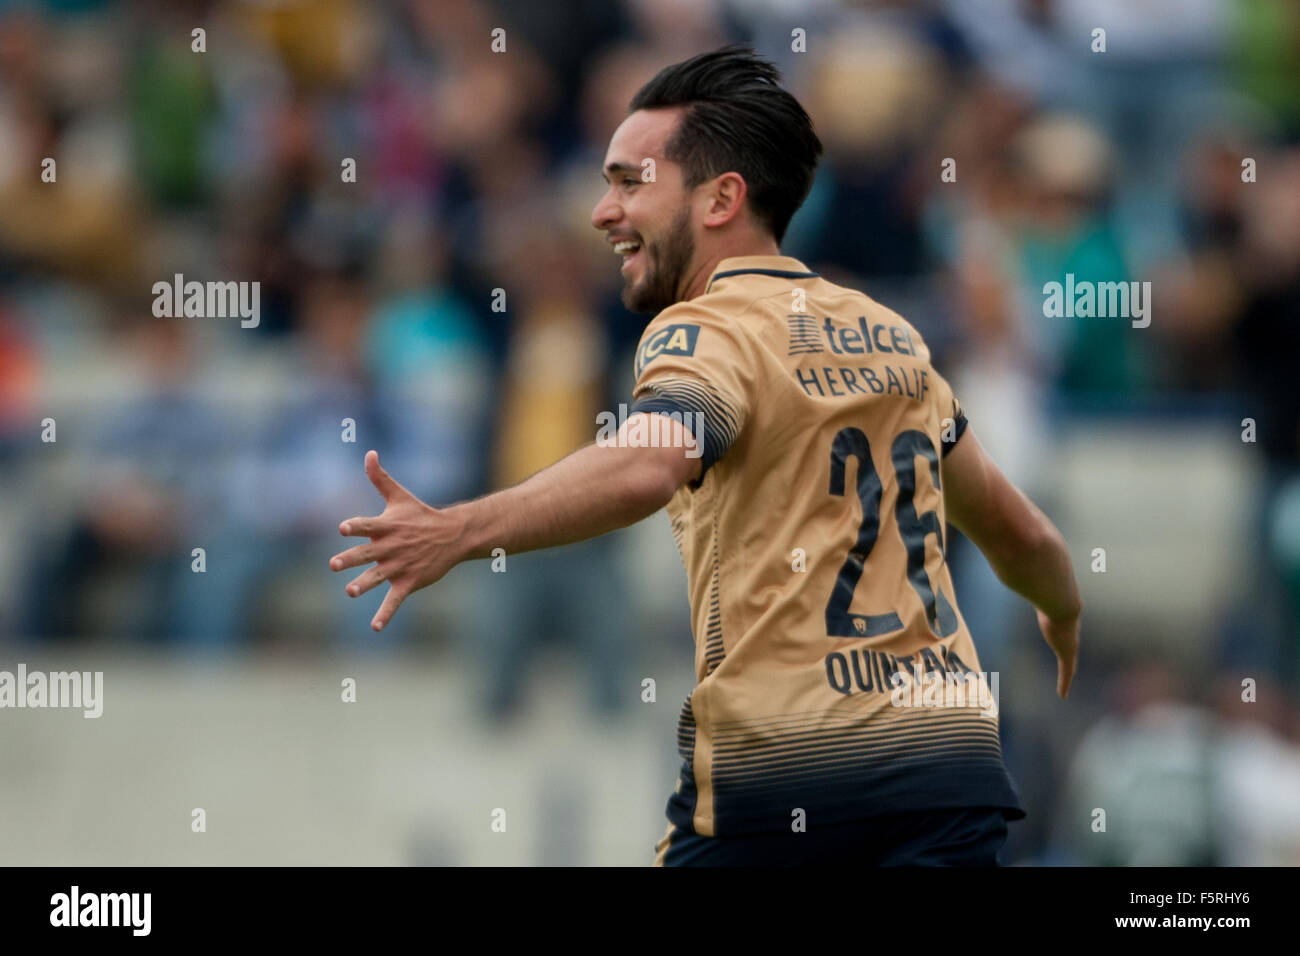 Luis quintana hi-res stock photography and images - Alamy